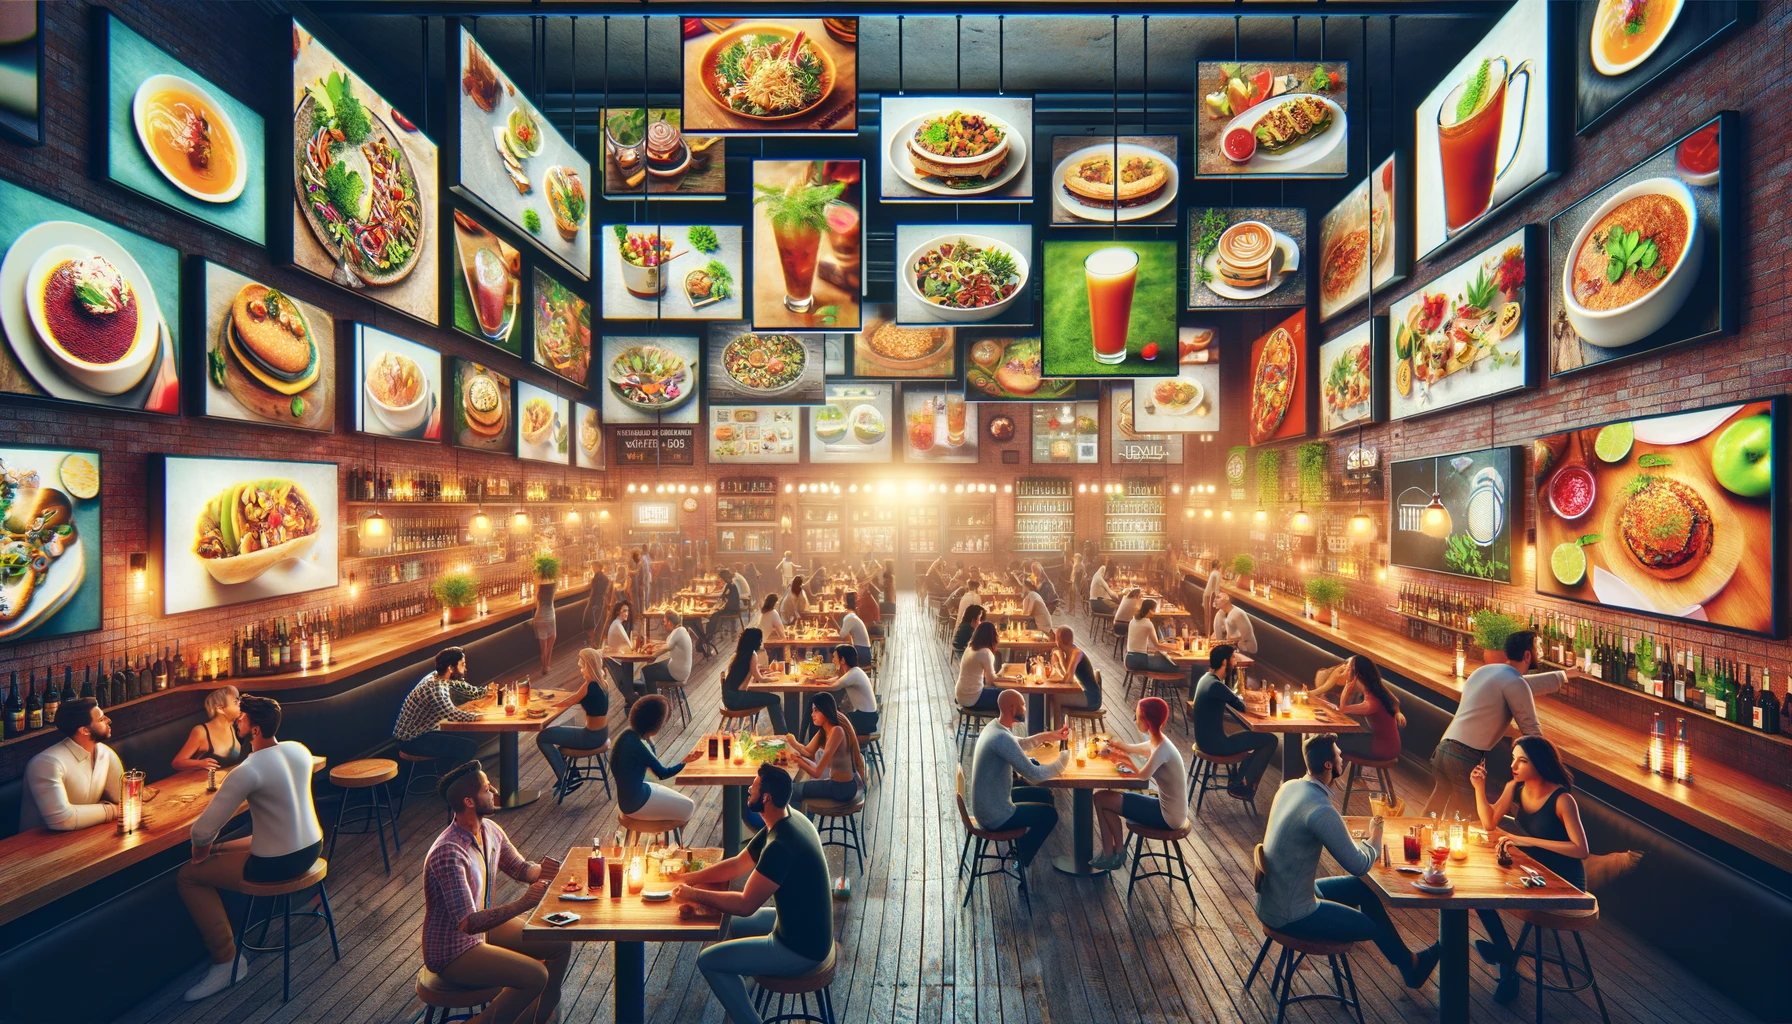 A wide, horizontal scene inside a lively bar or restaurant, showcasing high-definition TVs displaying advertisements for food and beverages, with patrons engaged in the vibrant, cozy atmosphere